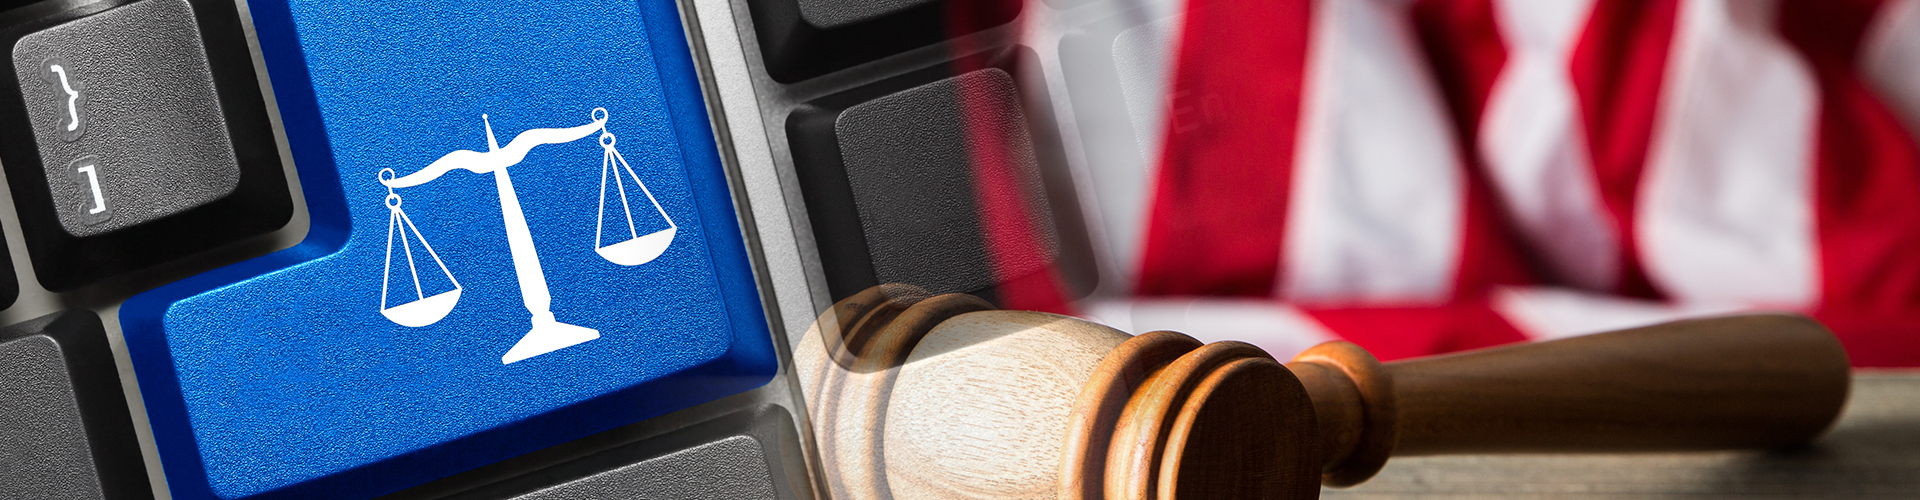 Montage of photos of a close-up of the US flag with a gavel and a computer keyboard with the scales of justice on a key.